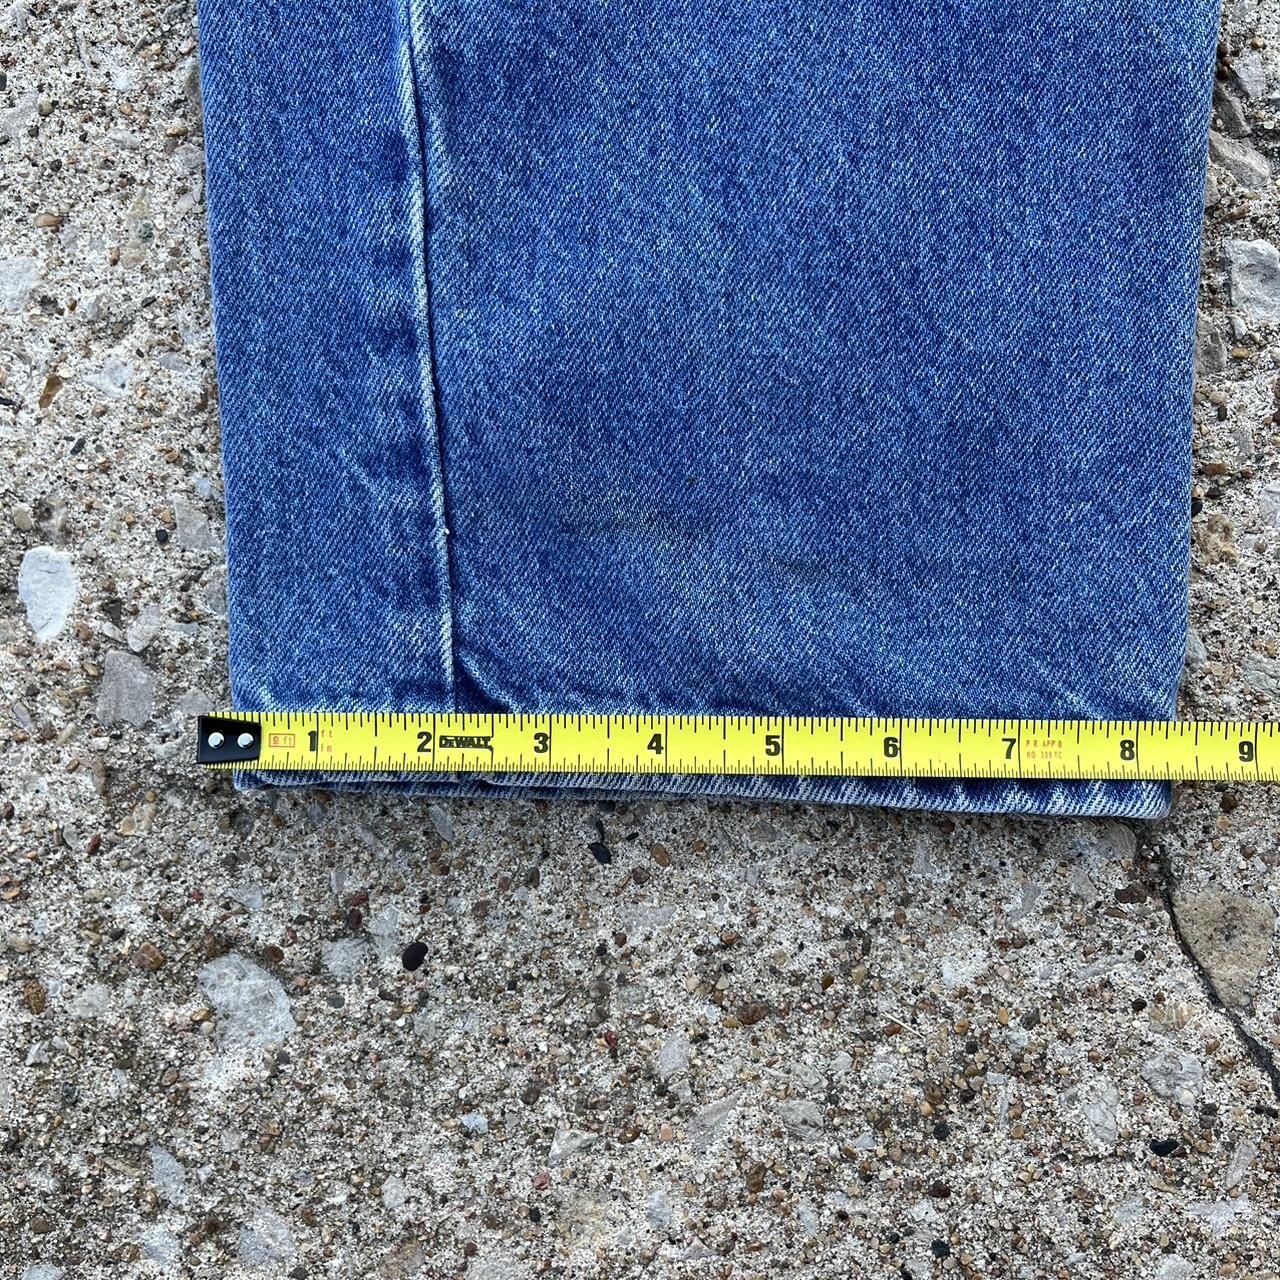 Vintage carhartt jeans Size tag ripped off or... - Depop